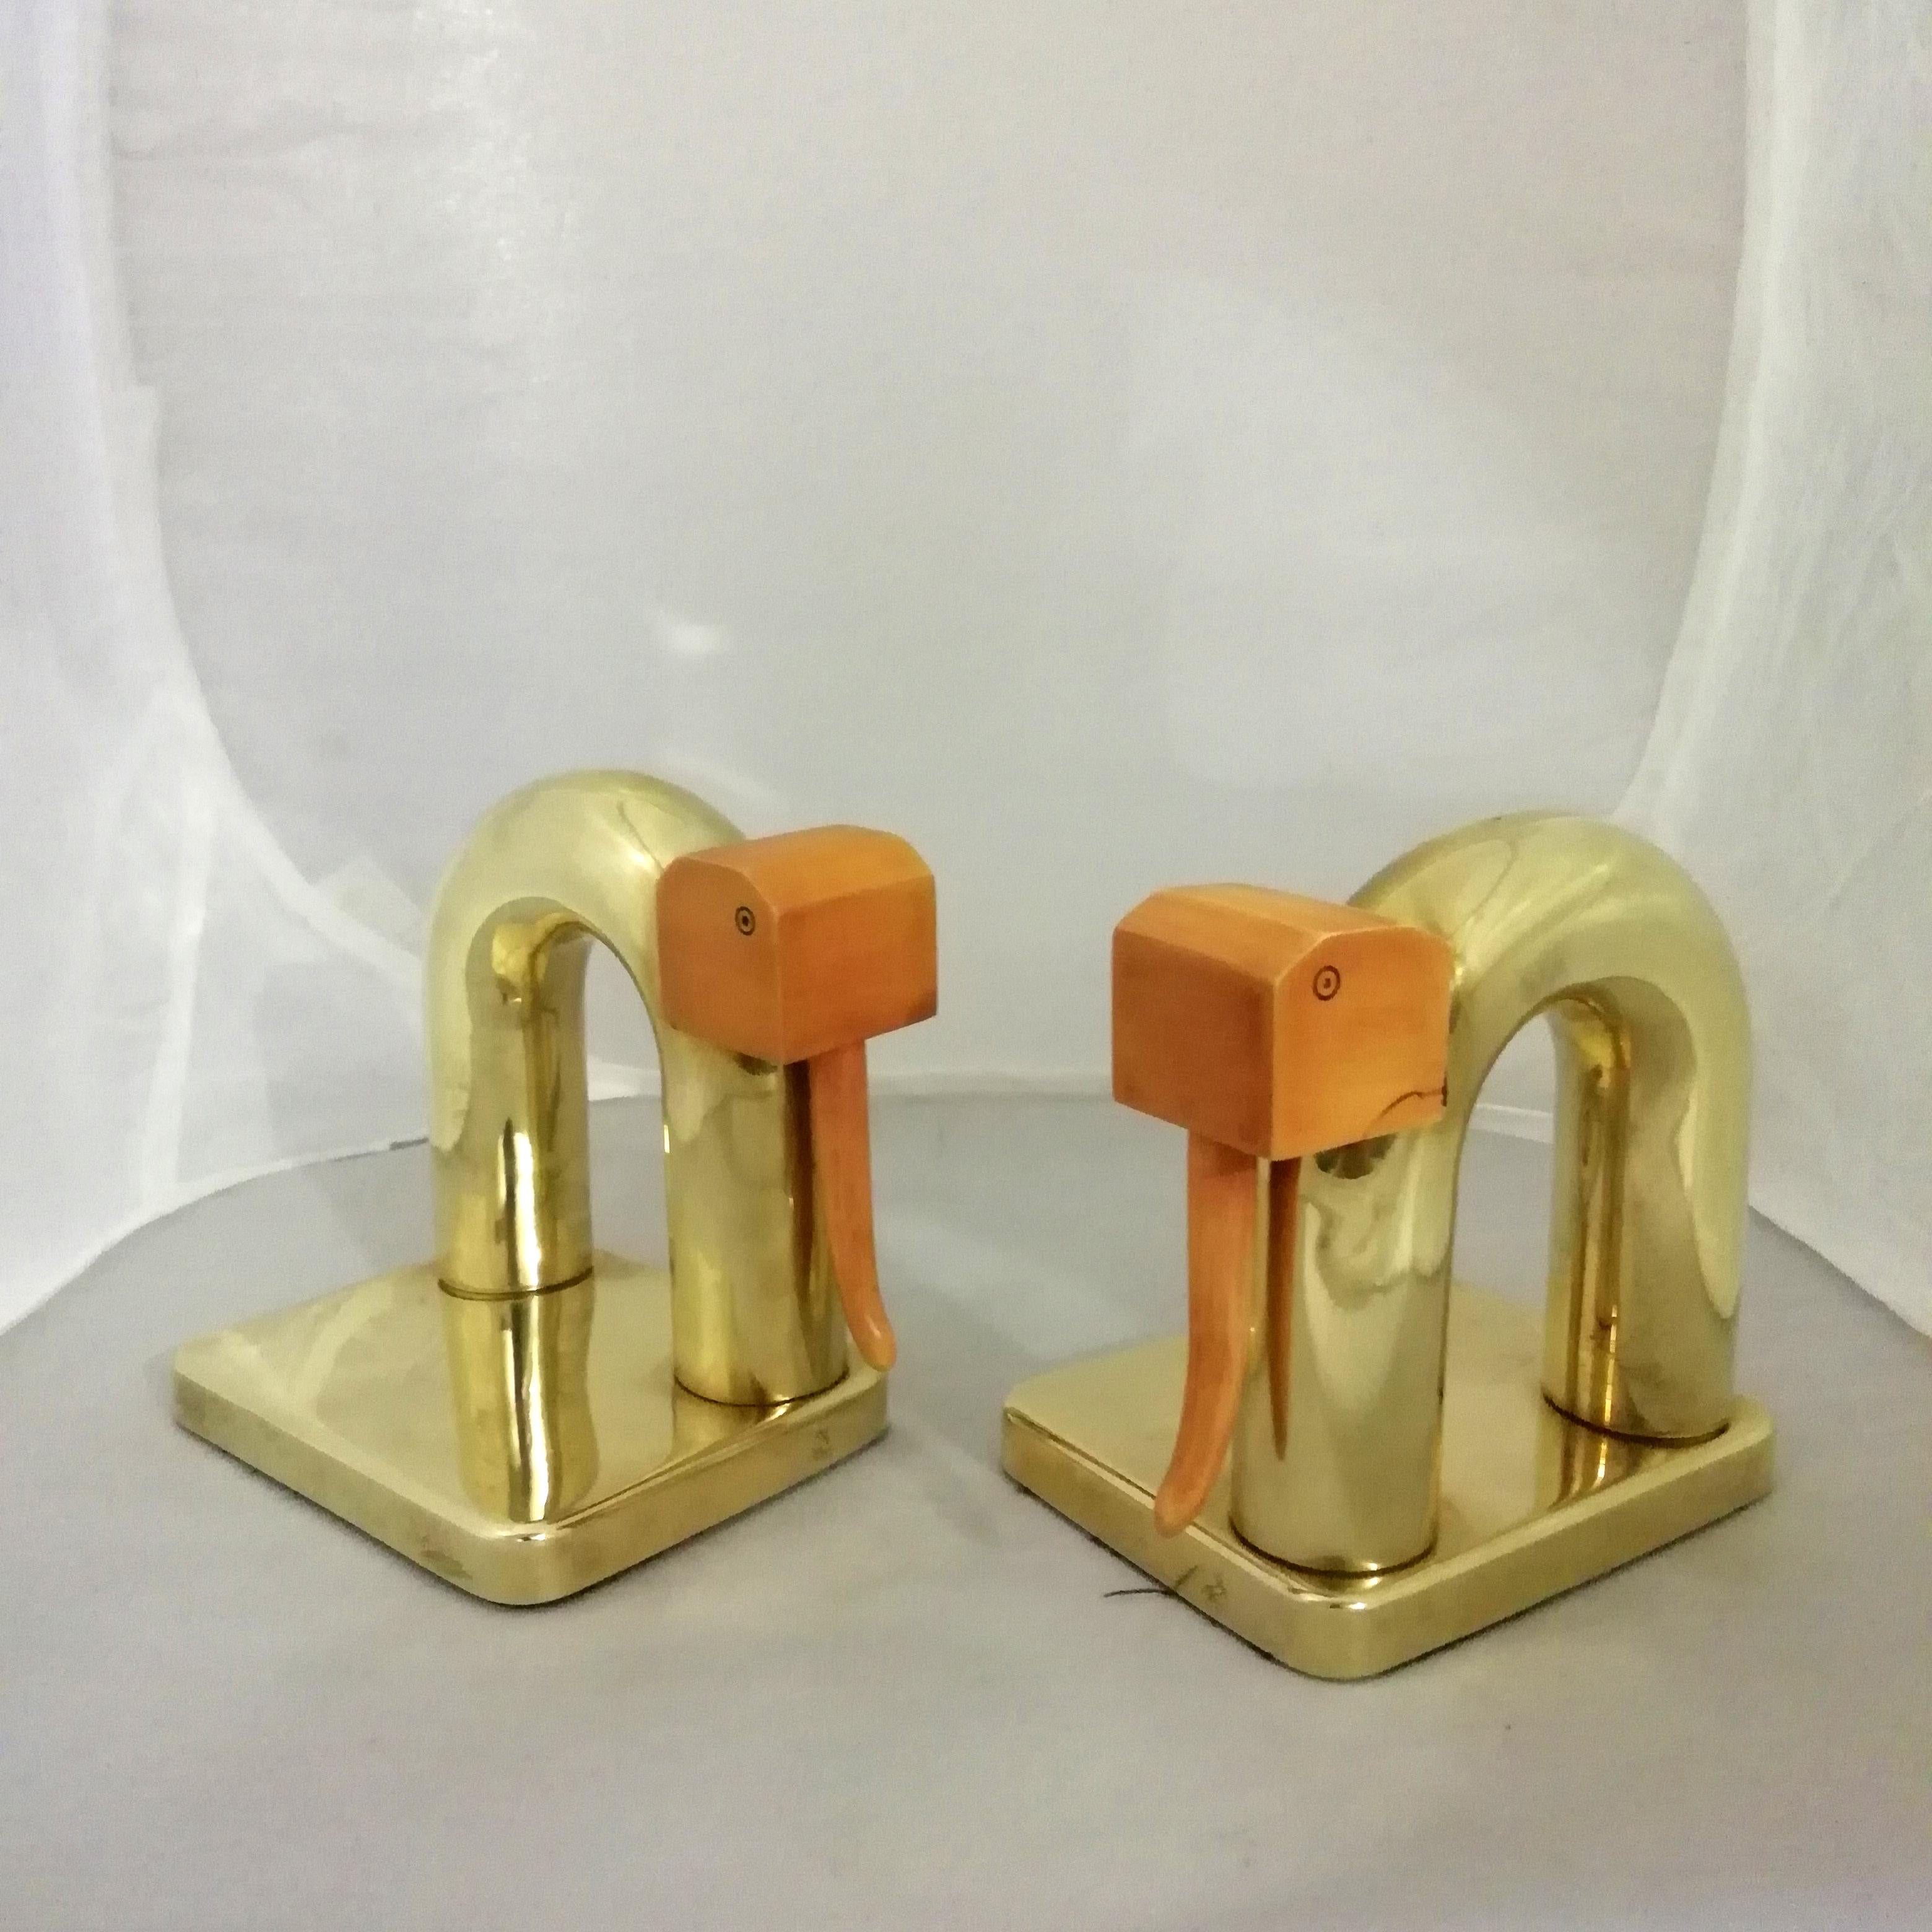 A pair of Art Deco brass bookend with bakelite heads in shape of elephants by German-born American designer Walter Von Nessen. Both pieces have the Chase Brass and Copper Company marks.